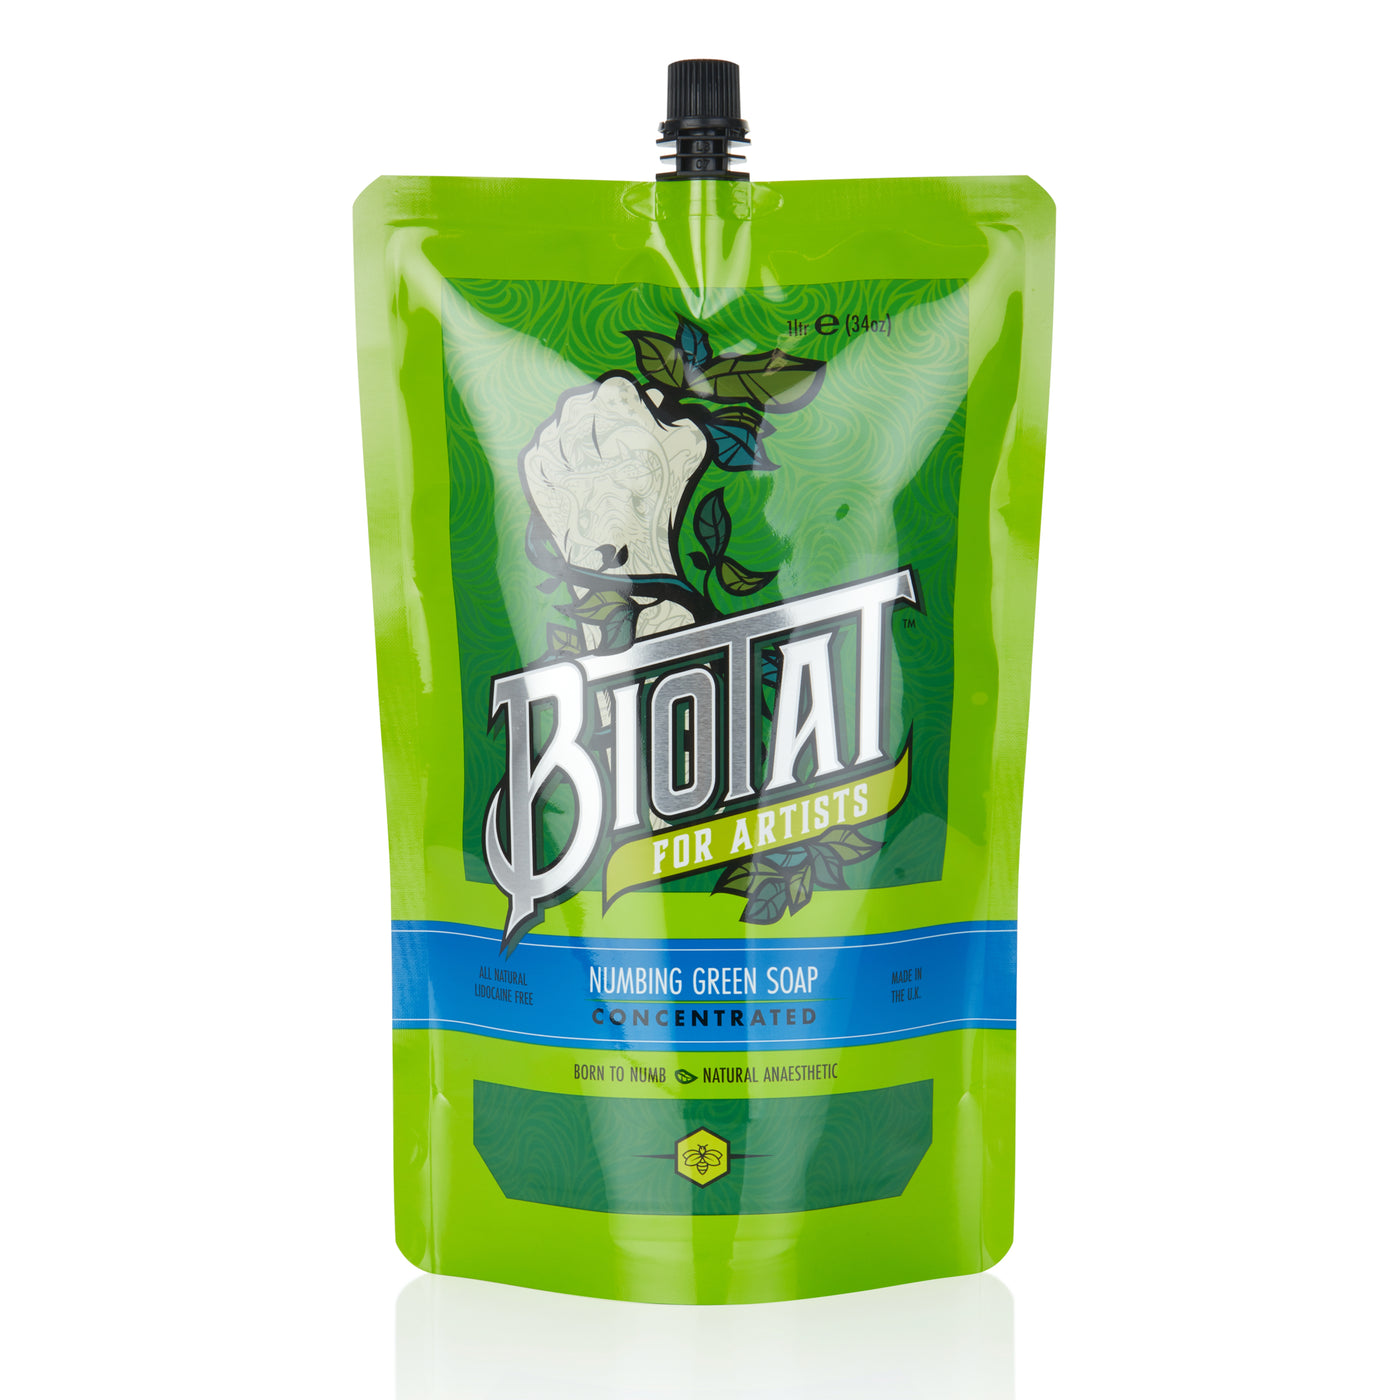 Biotat® Numbing Tattoo Green Soap Concentrated